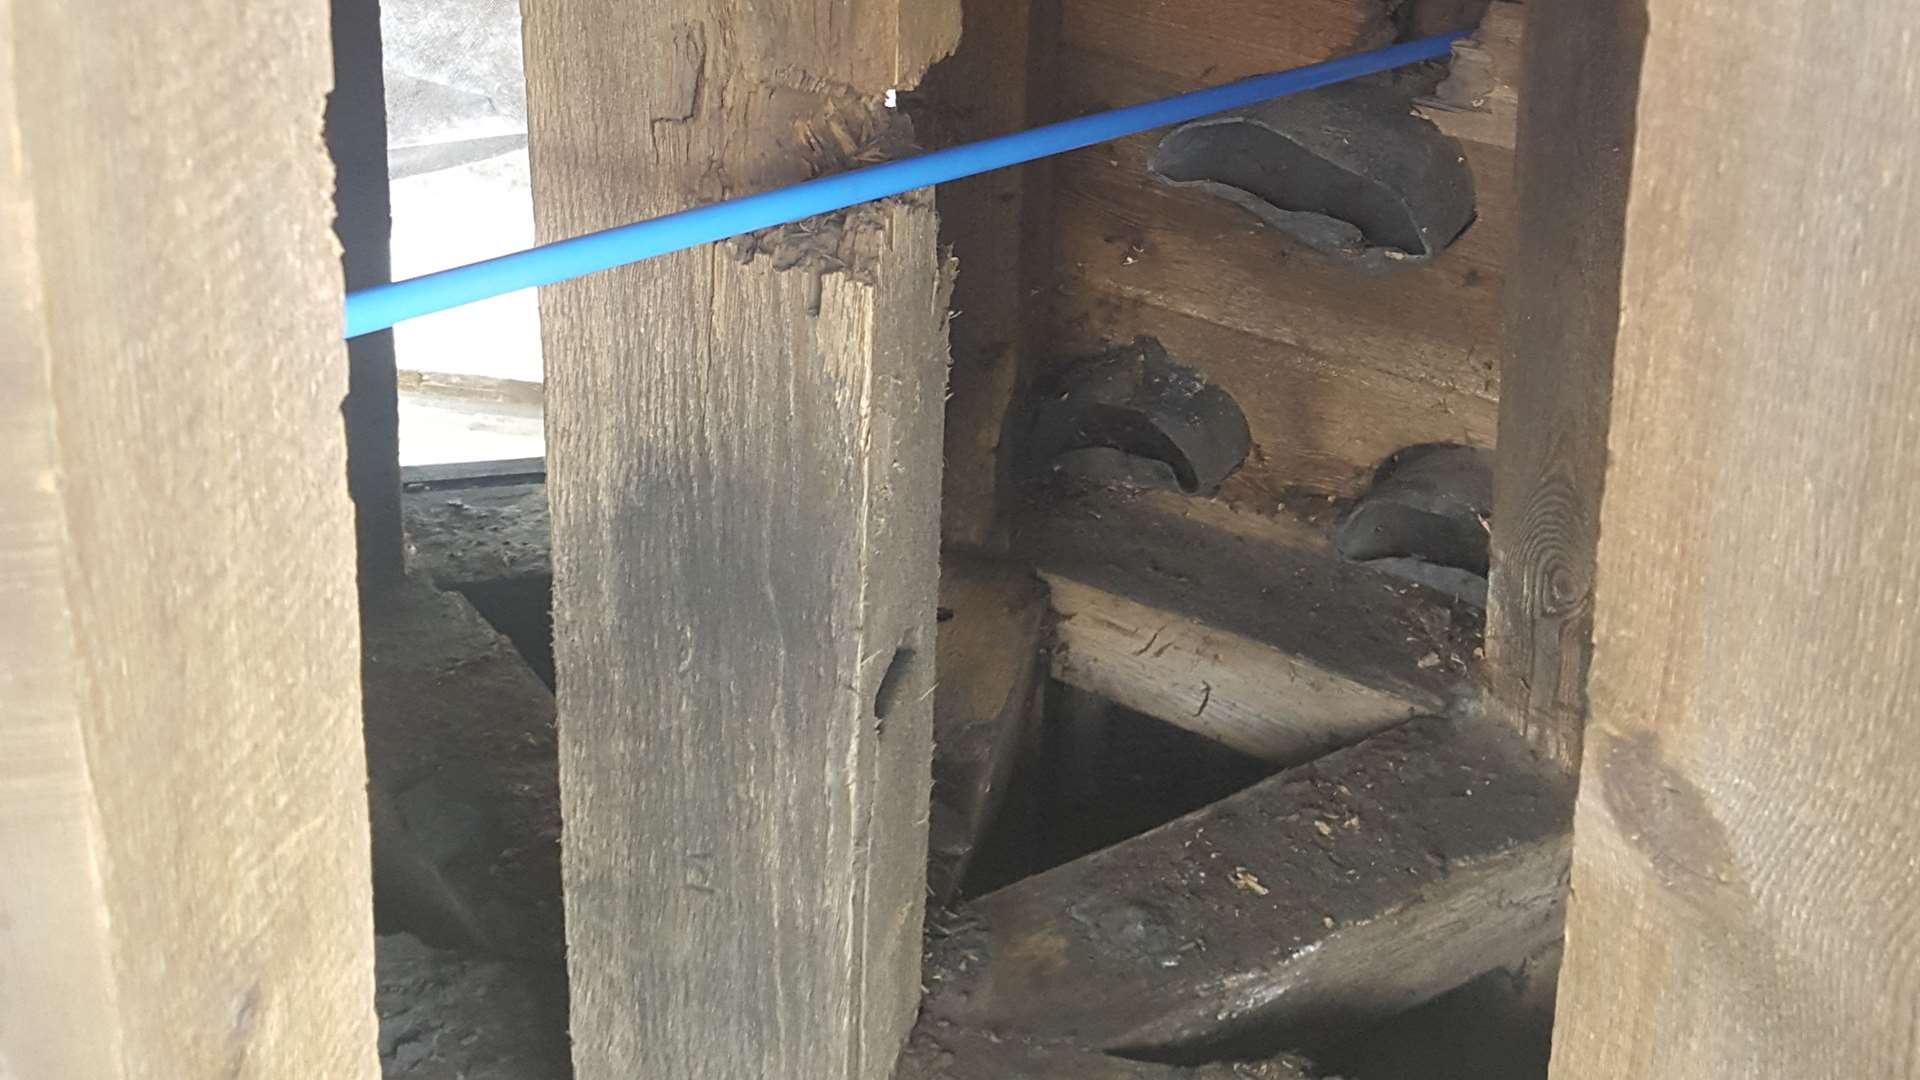 The leak remained a mystery for more than 75 years